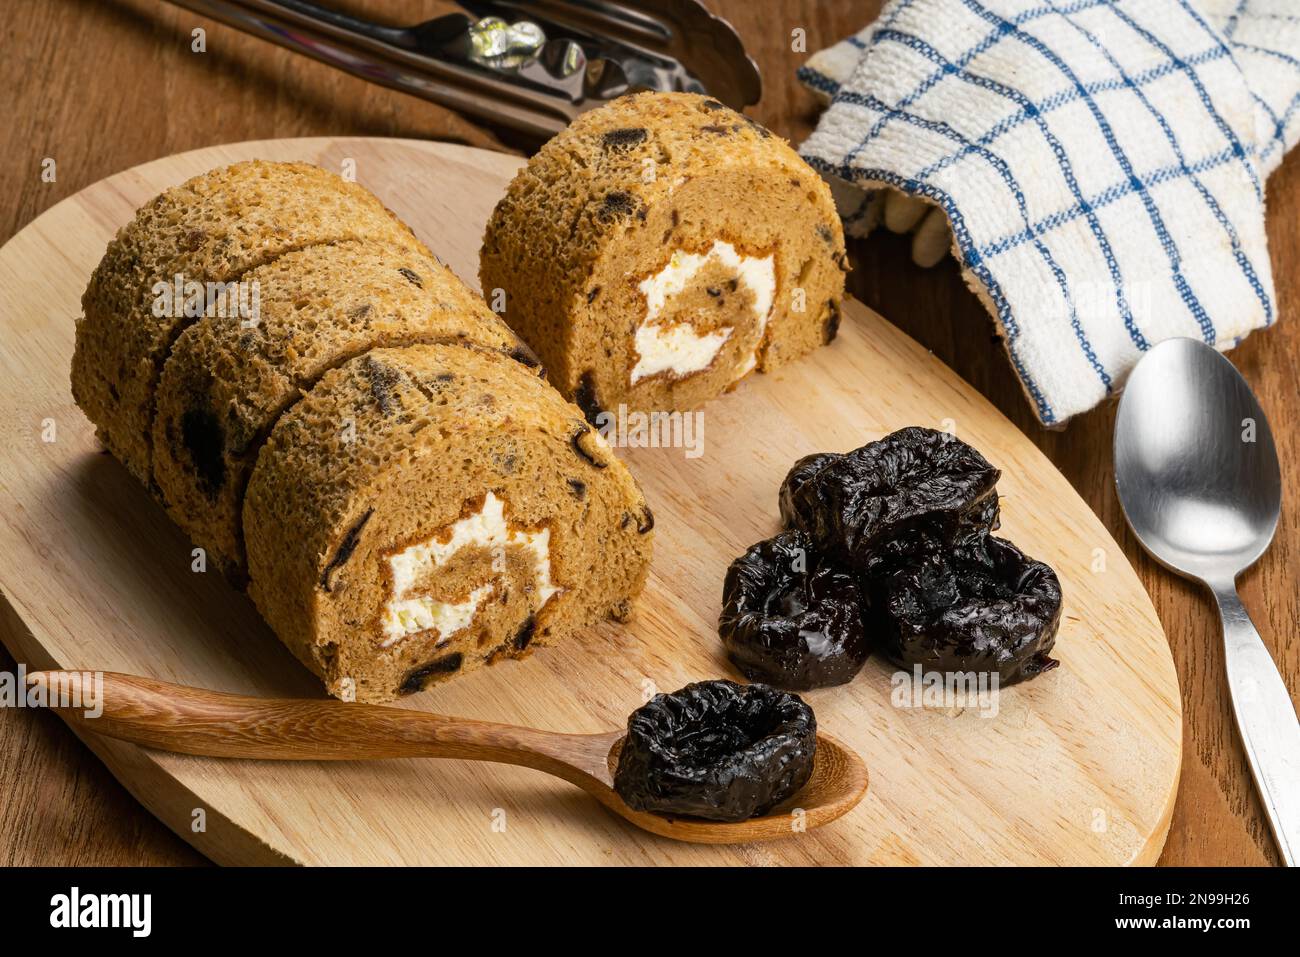 Hogh angle view of homemade sponge cake roll and dried pitted prune fruit on wooden board with metal spoon, metal tongs and tablecloth on wooden table Stock Photo